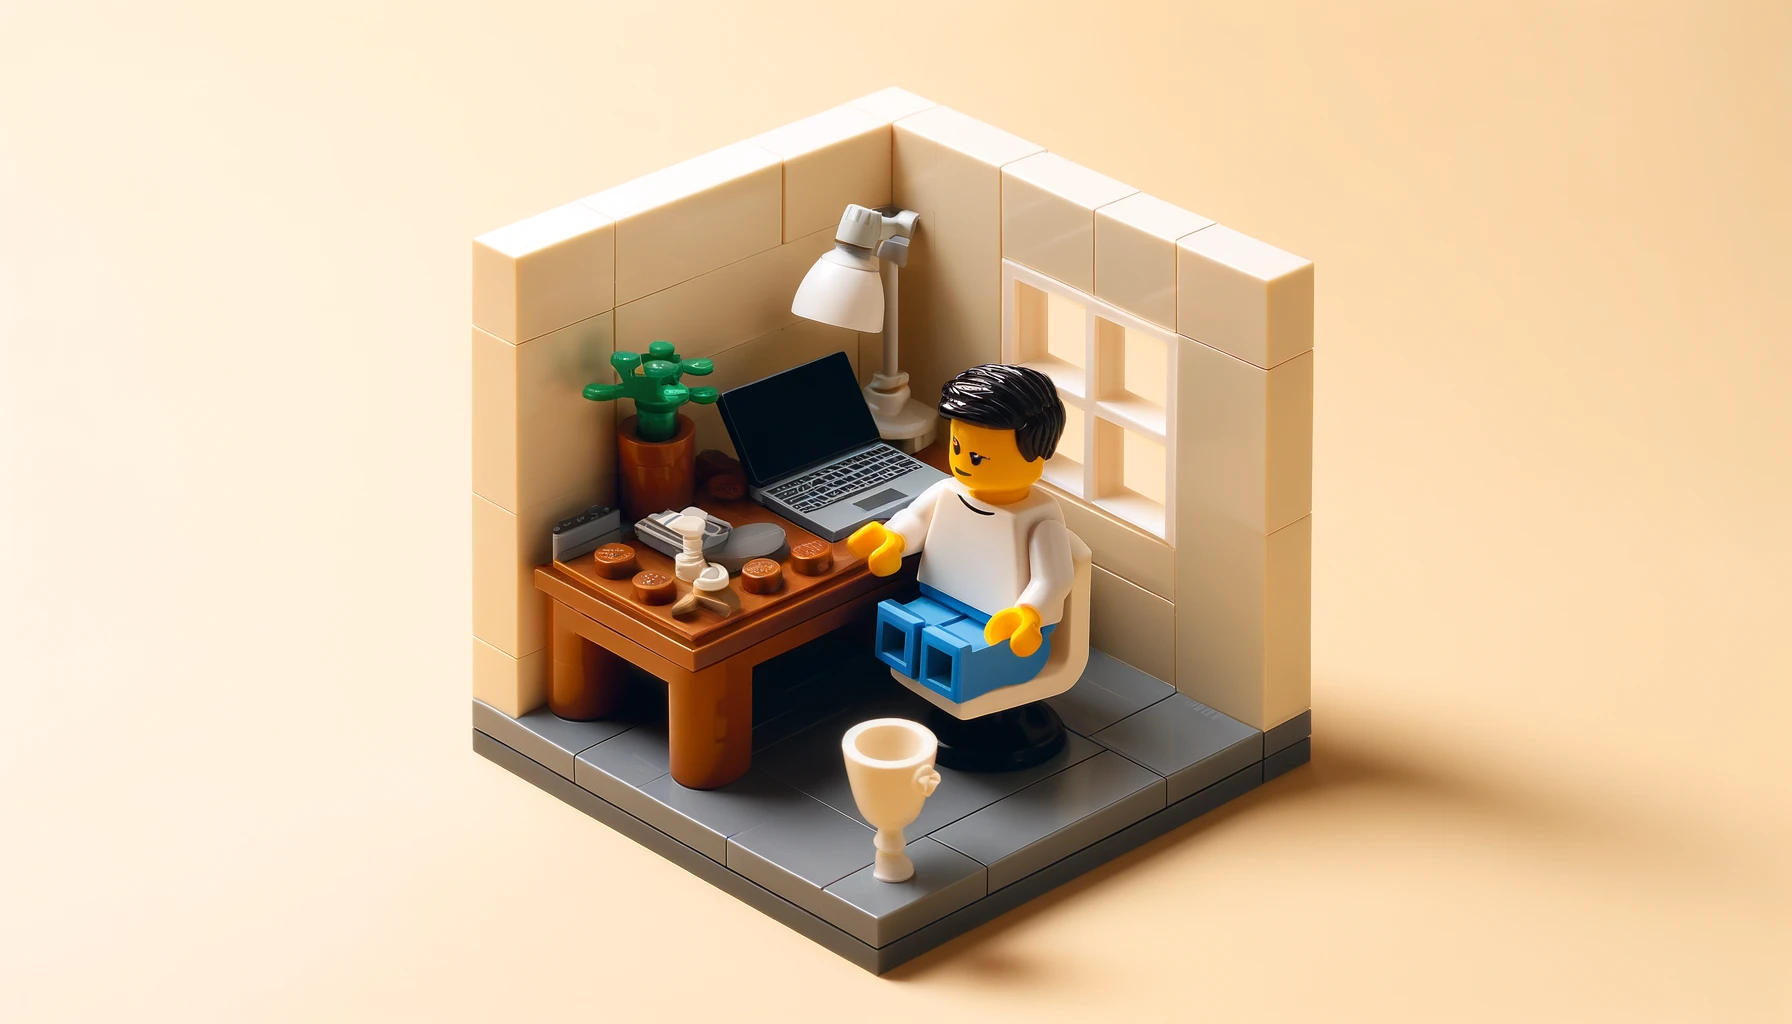 A simple Lego scene showing a Lego minifigure at a small desk inside a Lego home office.